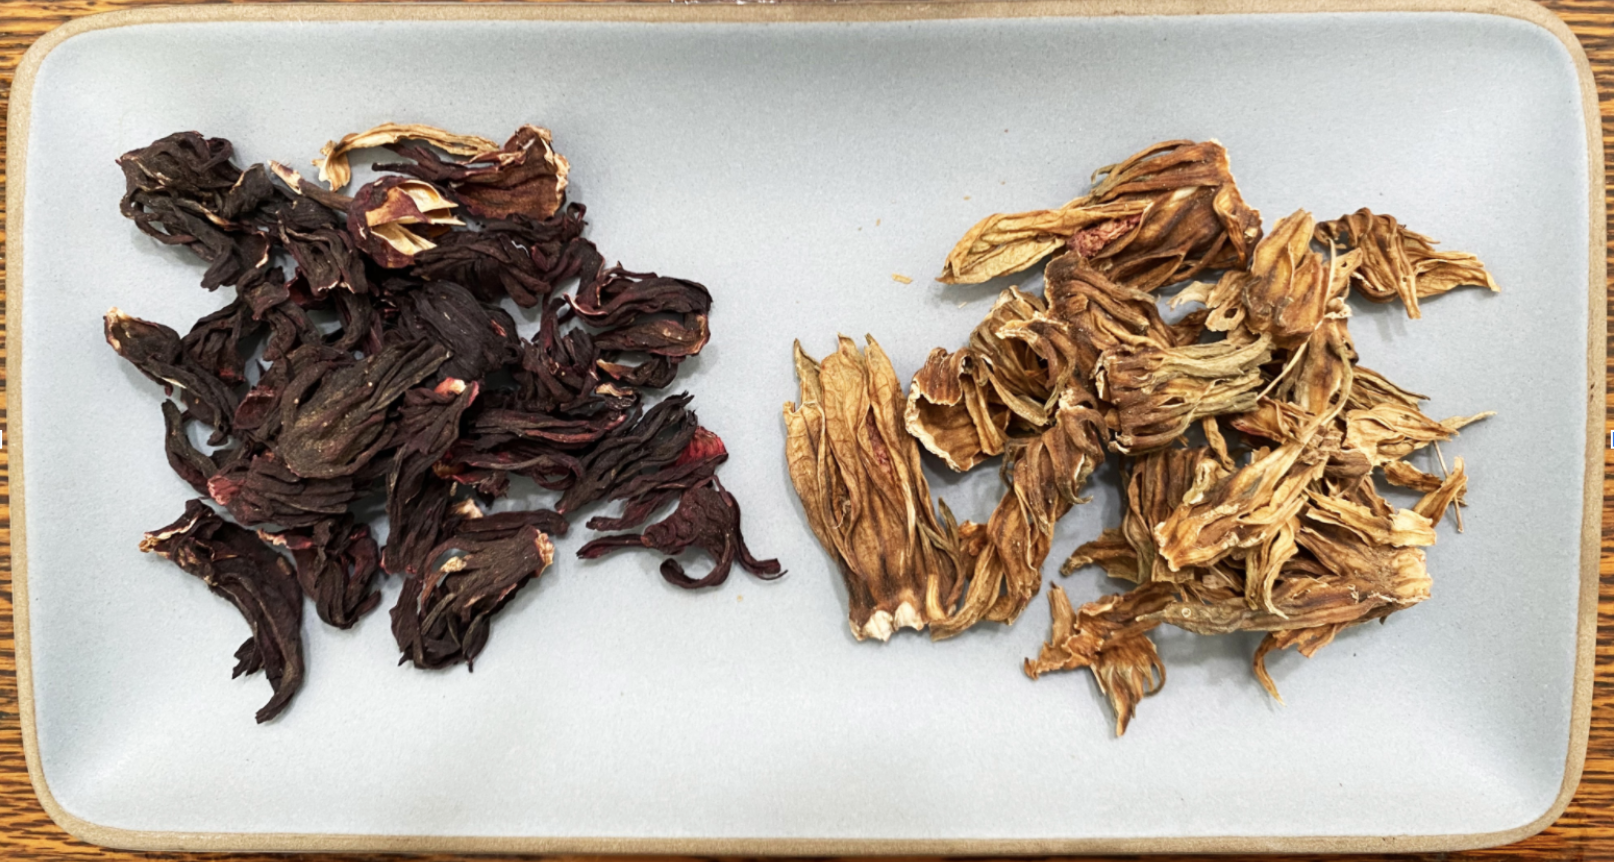  I originally purchased dried hibiscus flowers from a market in Dakar, Senegal in March 2020. I used it as a natural dye to represent the DNA/blood of my ancestors. I use it as a reminder of who I am historically and spiritually.&nbsp; 